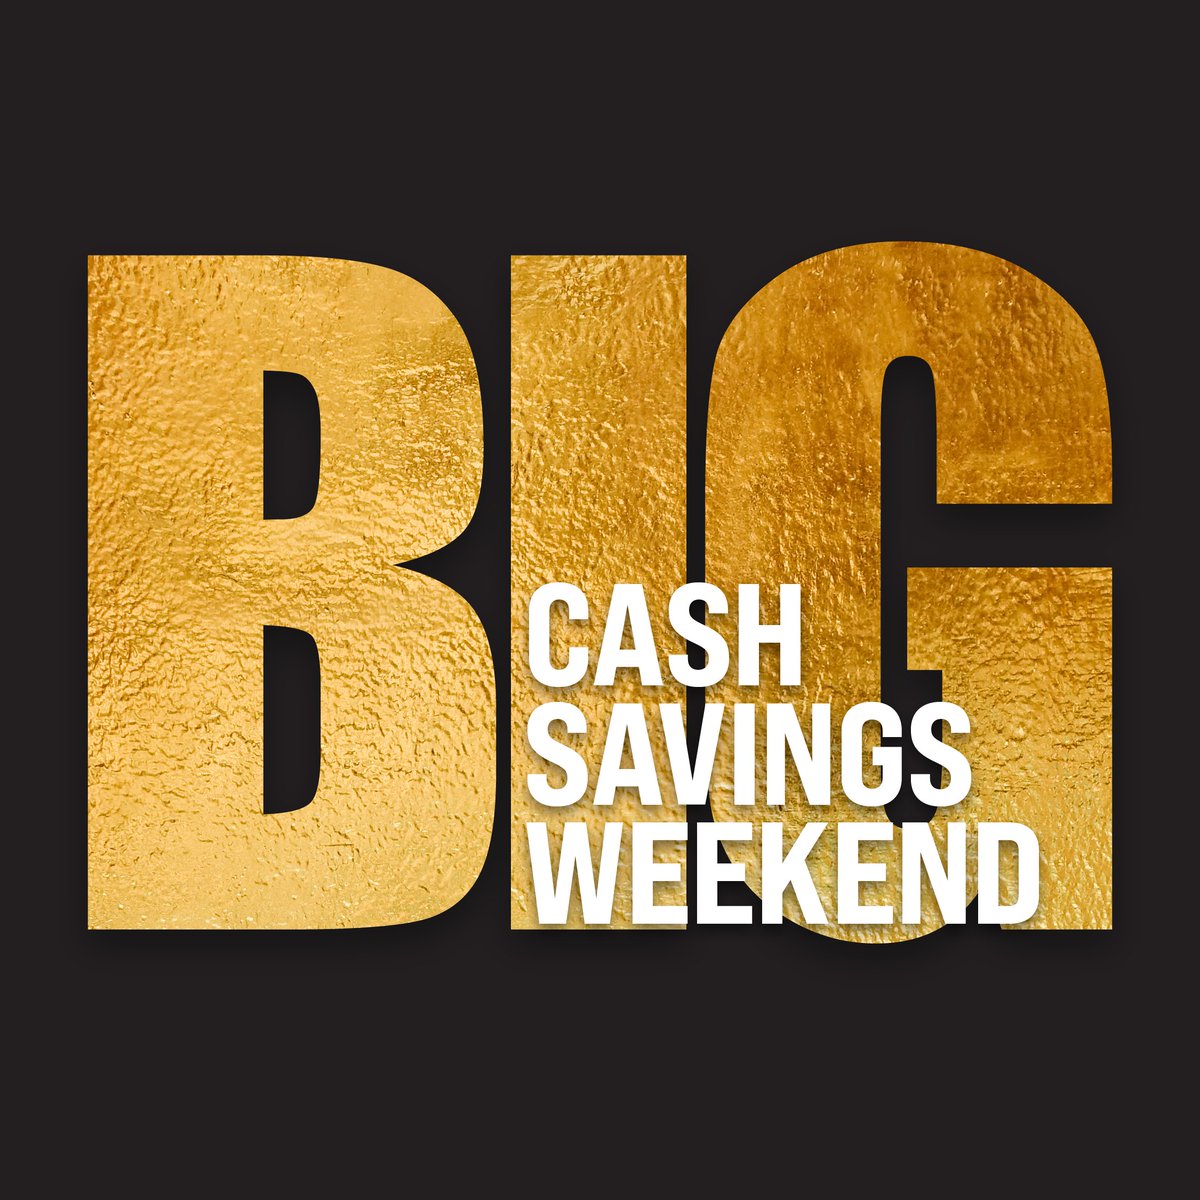 May 3 - 5.

This weekend, for 3 days only we have INSANE cash savings for you.
Savings on upholstery ✅ Mattresses ✅ reclining ✅ and more!

Do not miss this opportunity to finally get the furniture you've been day-dreaming about. 

 #klosstohome #FurnitureDeals #WeekendSale